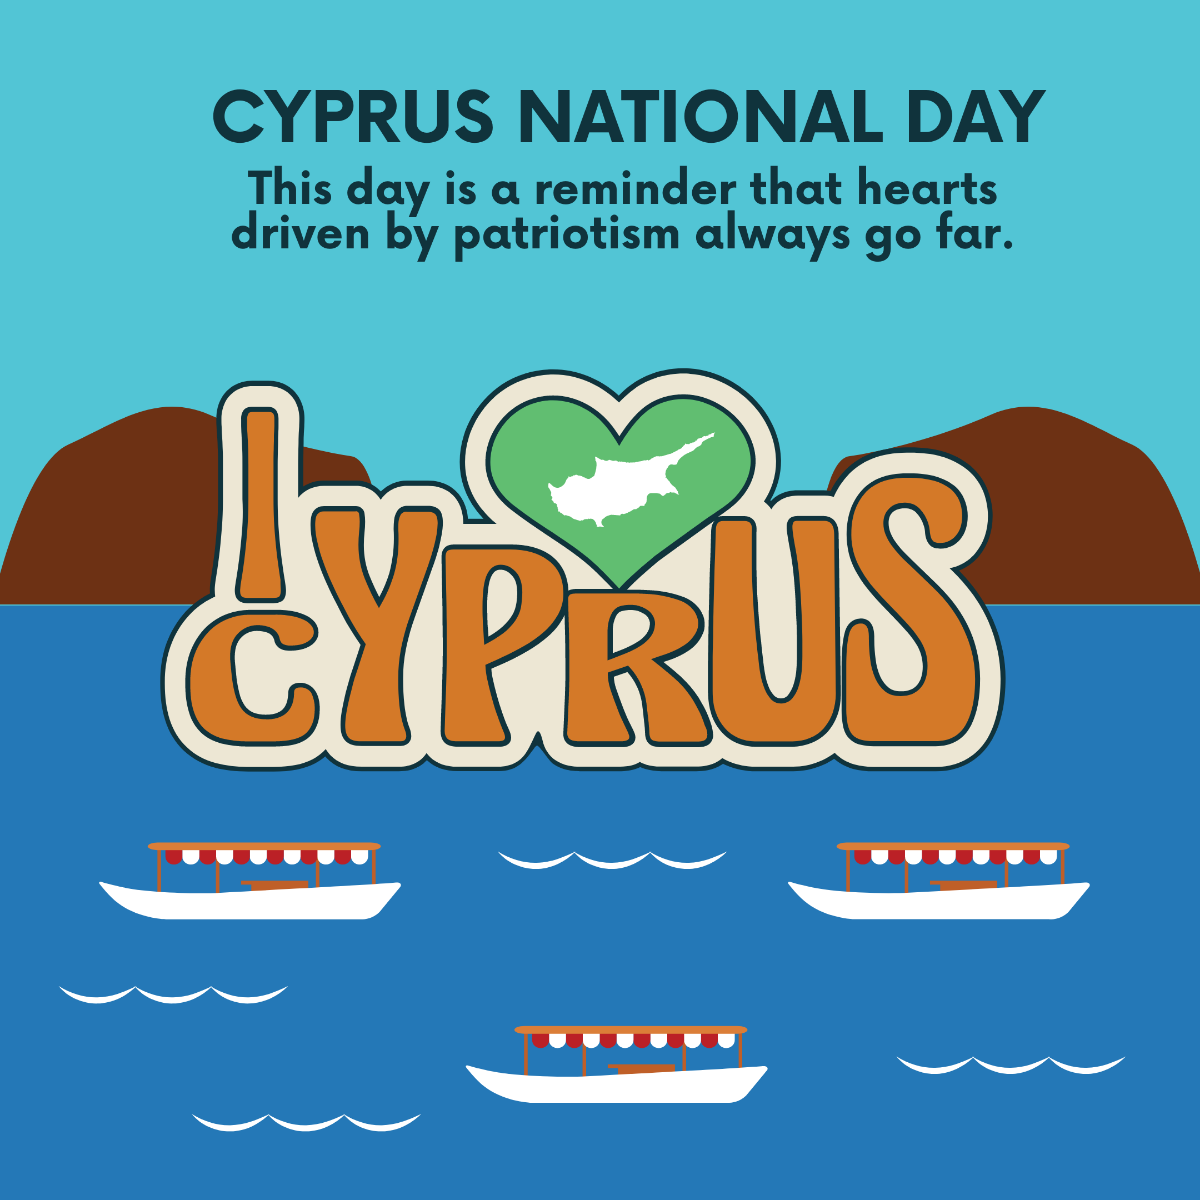 Cyprus National Day Instagram Post Template